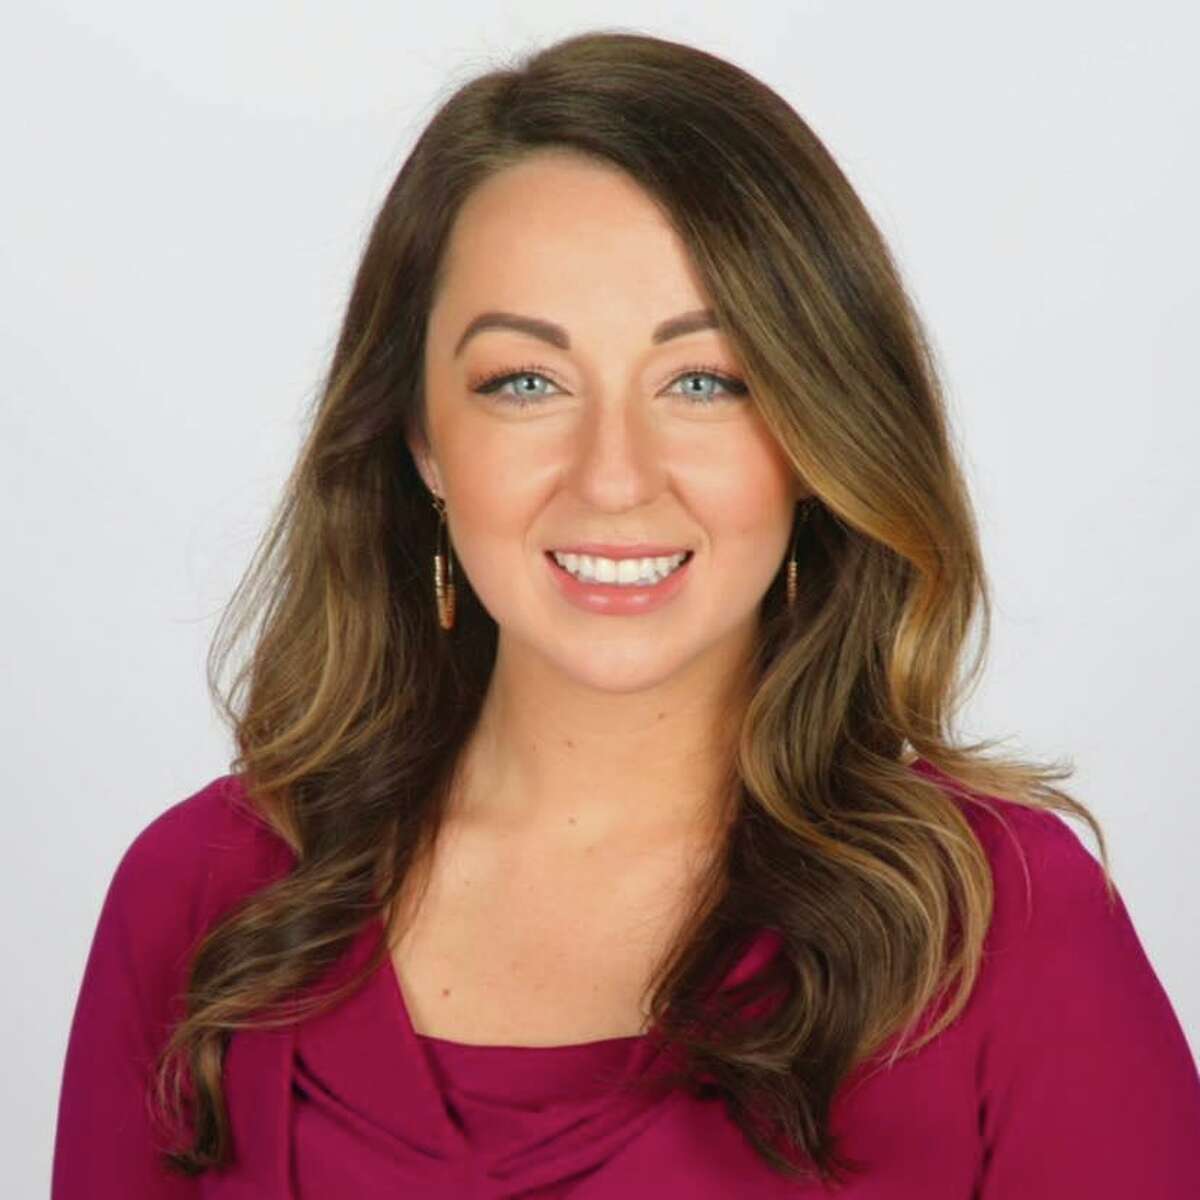 After spending years as a broadcast news reporter, Connecticut-native Erin Henry will become Danbury's first public relations specialist for its departments of health, police, fire, and emergency services.